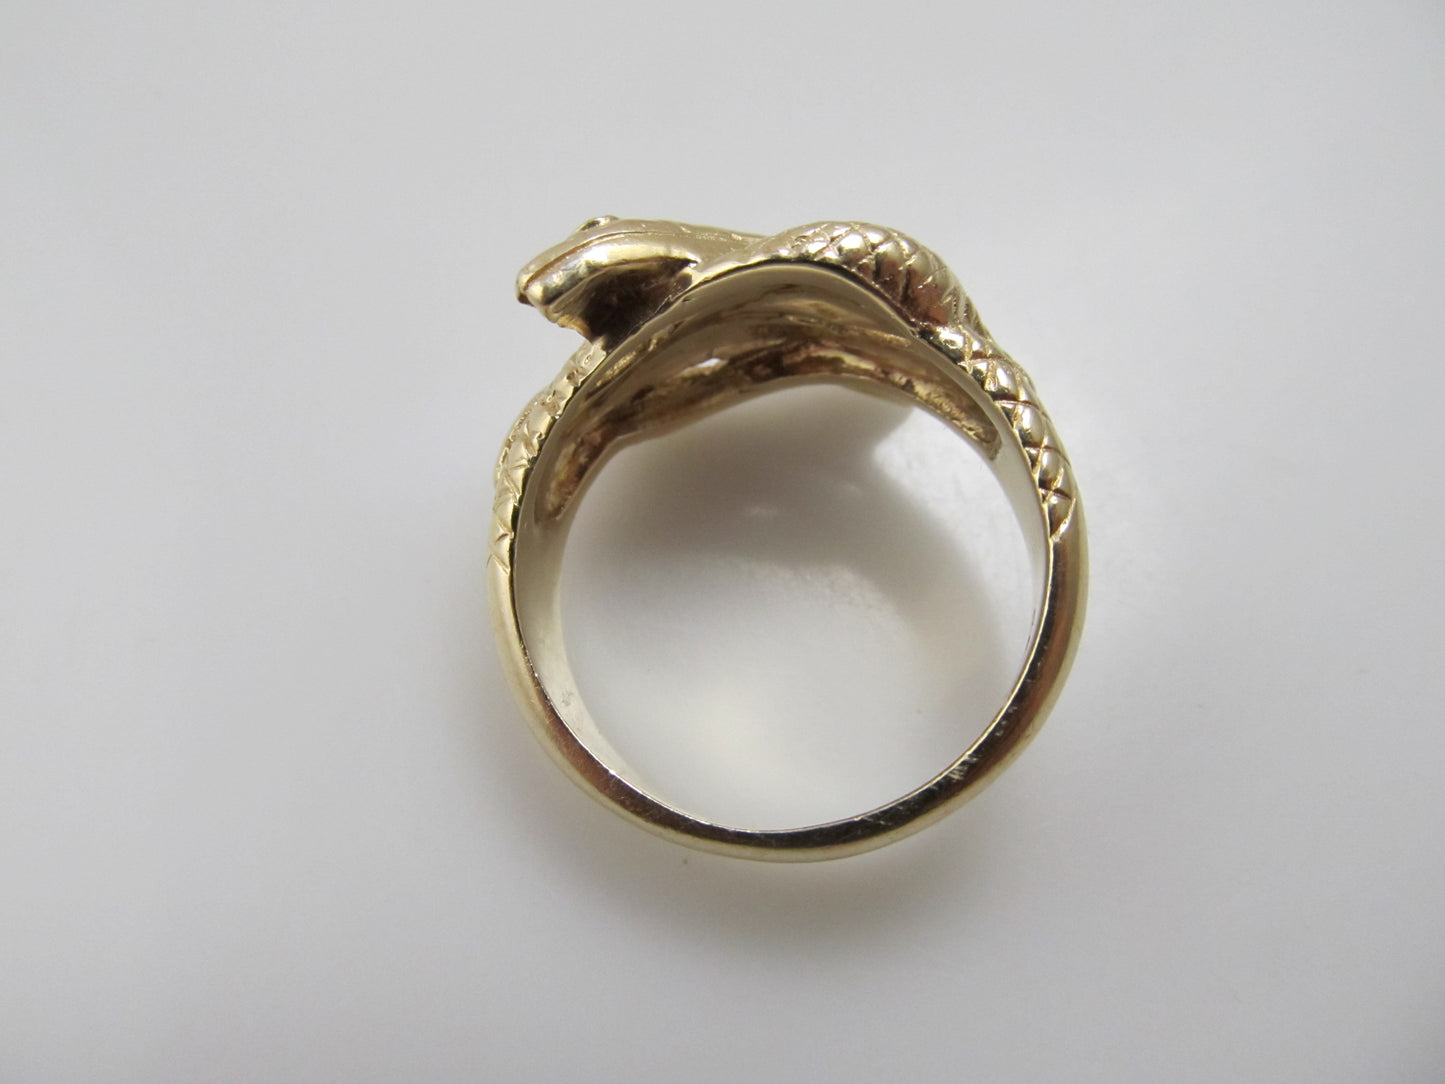 Vintage double snake ring